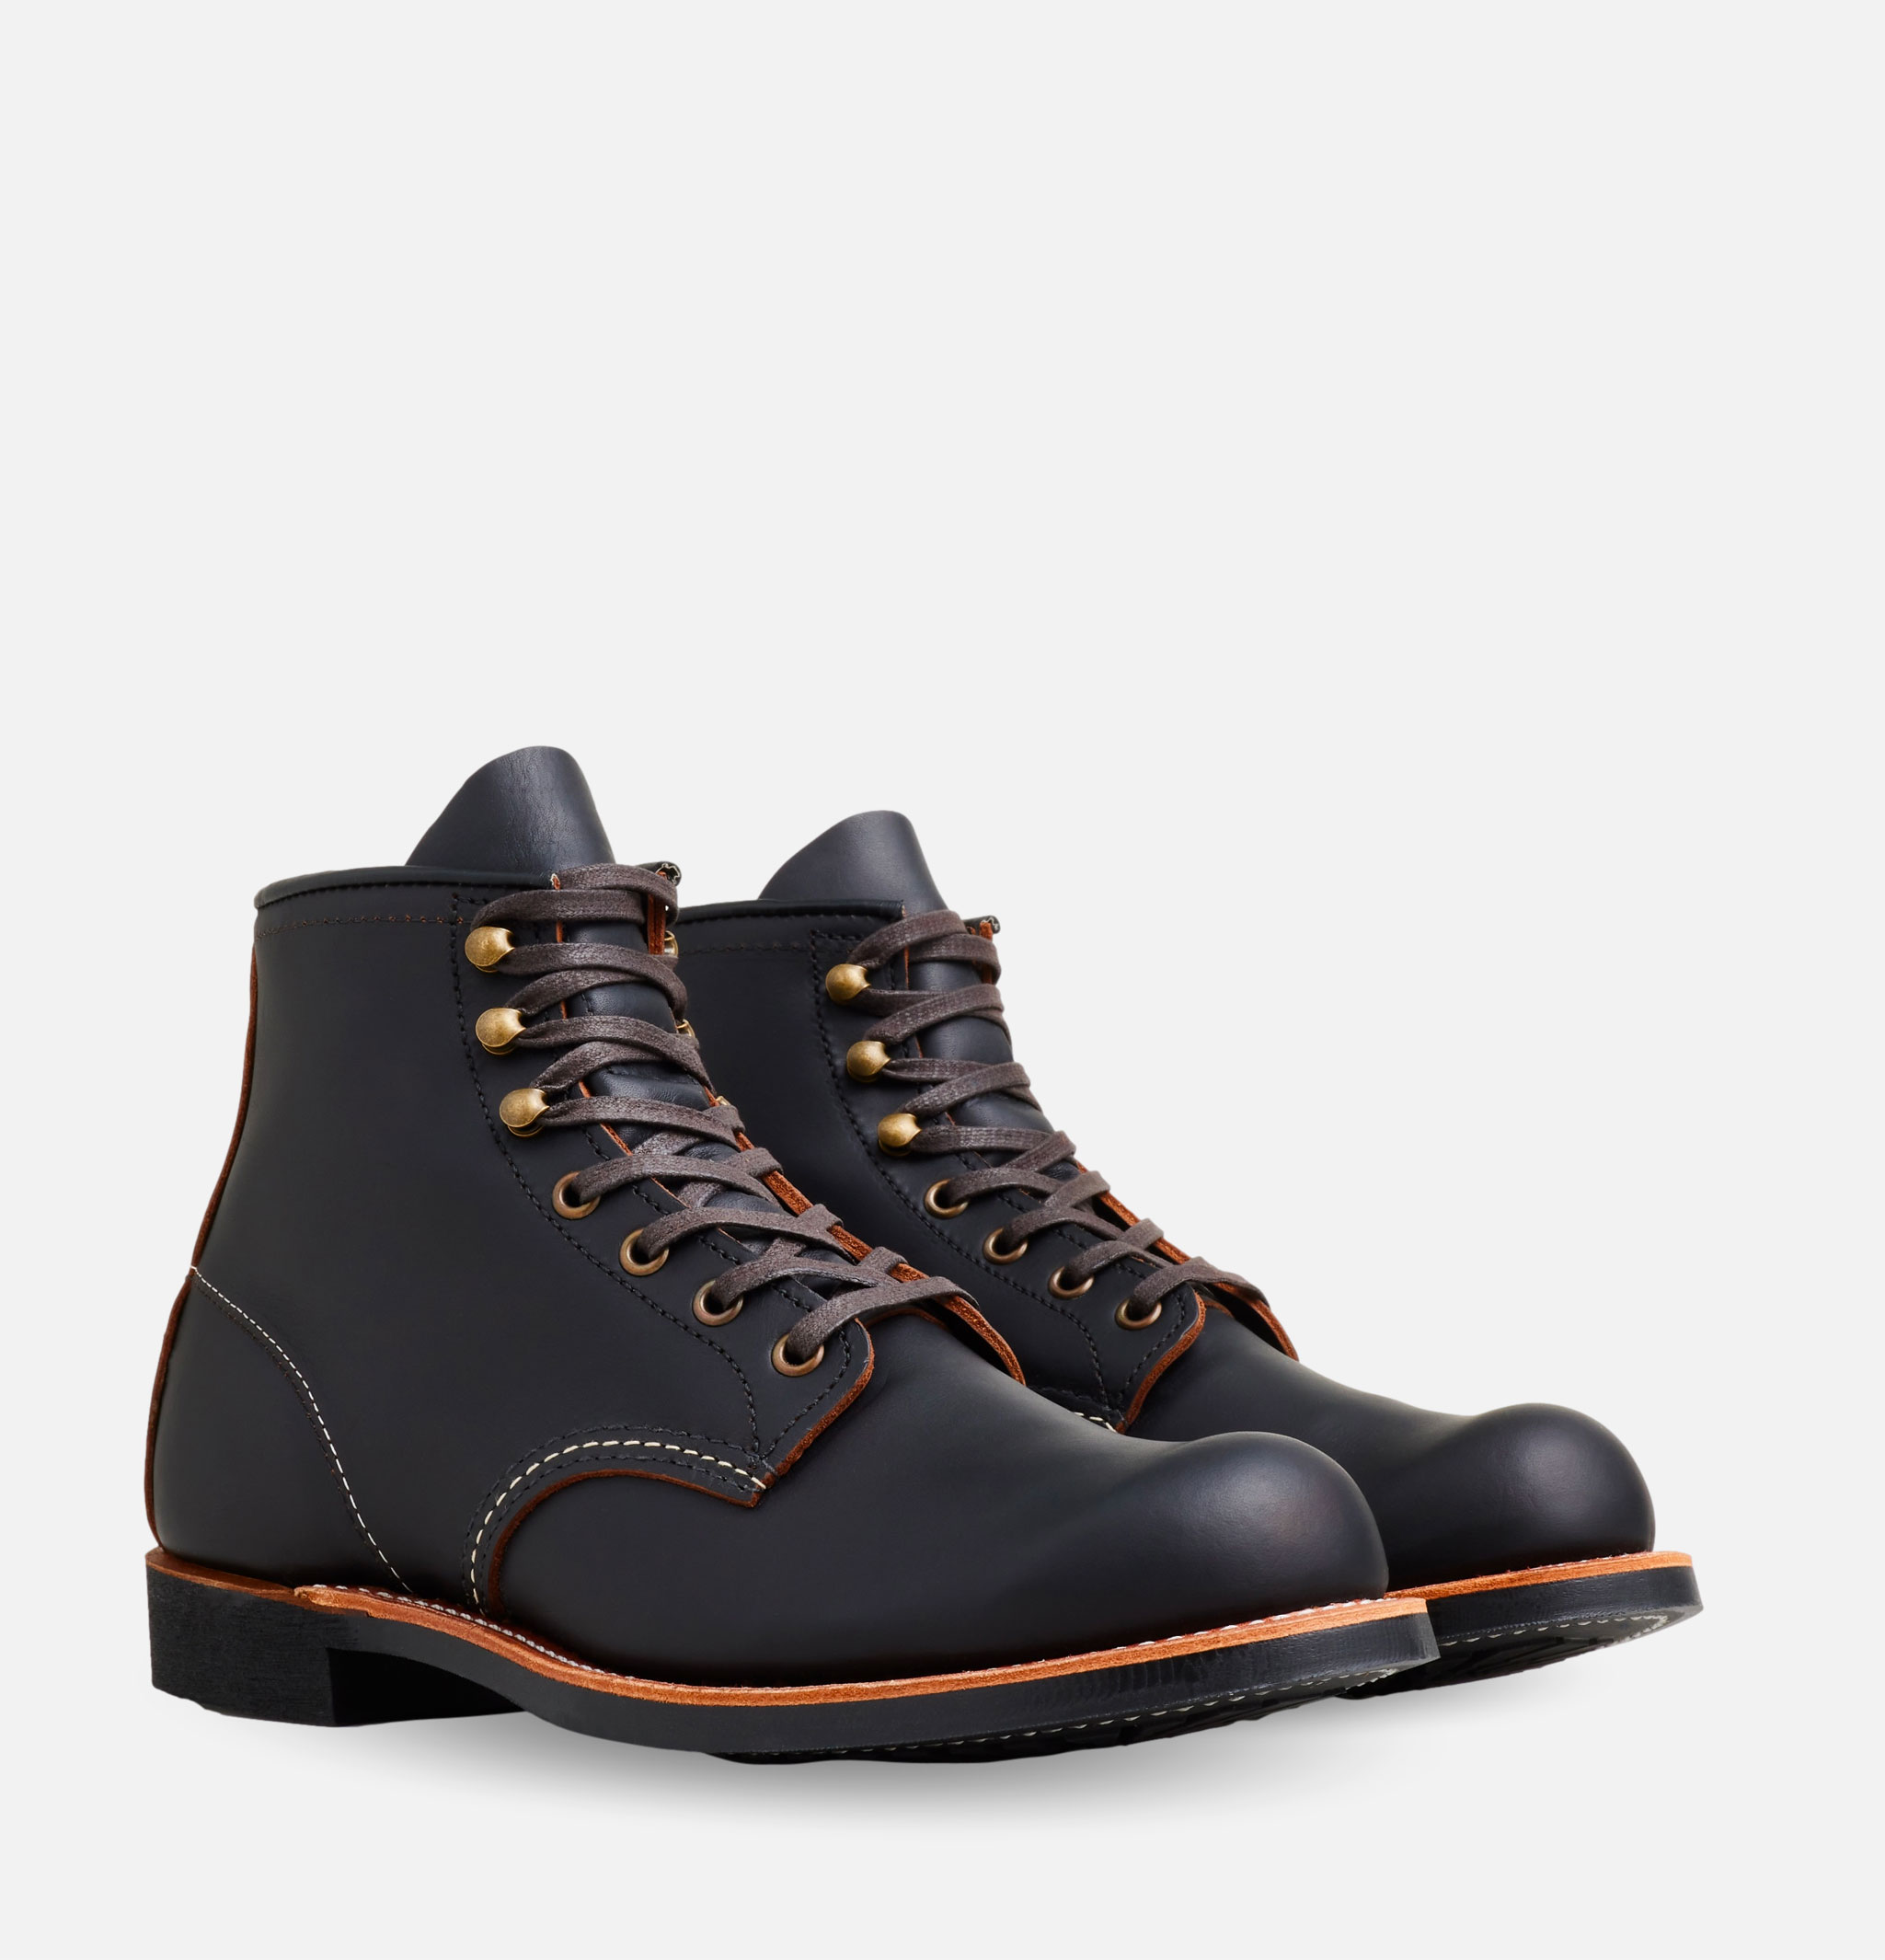 Red Wing Shoes - 3345 Blacksmith Black 